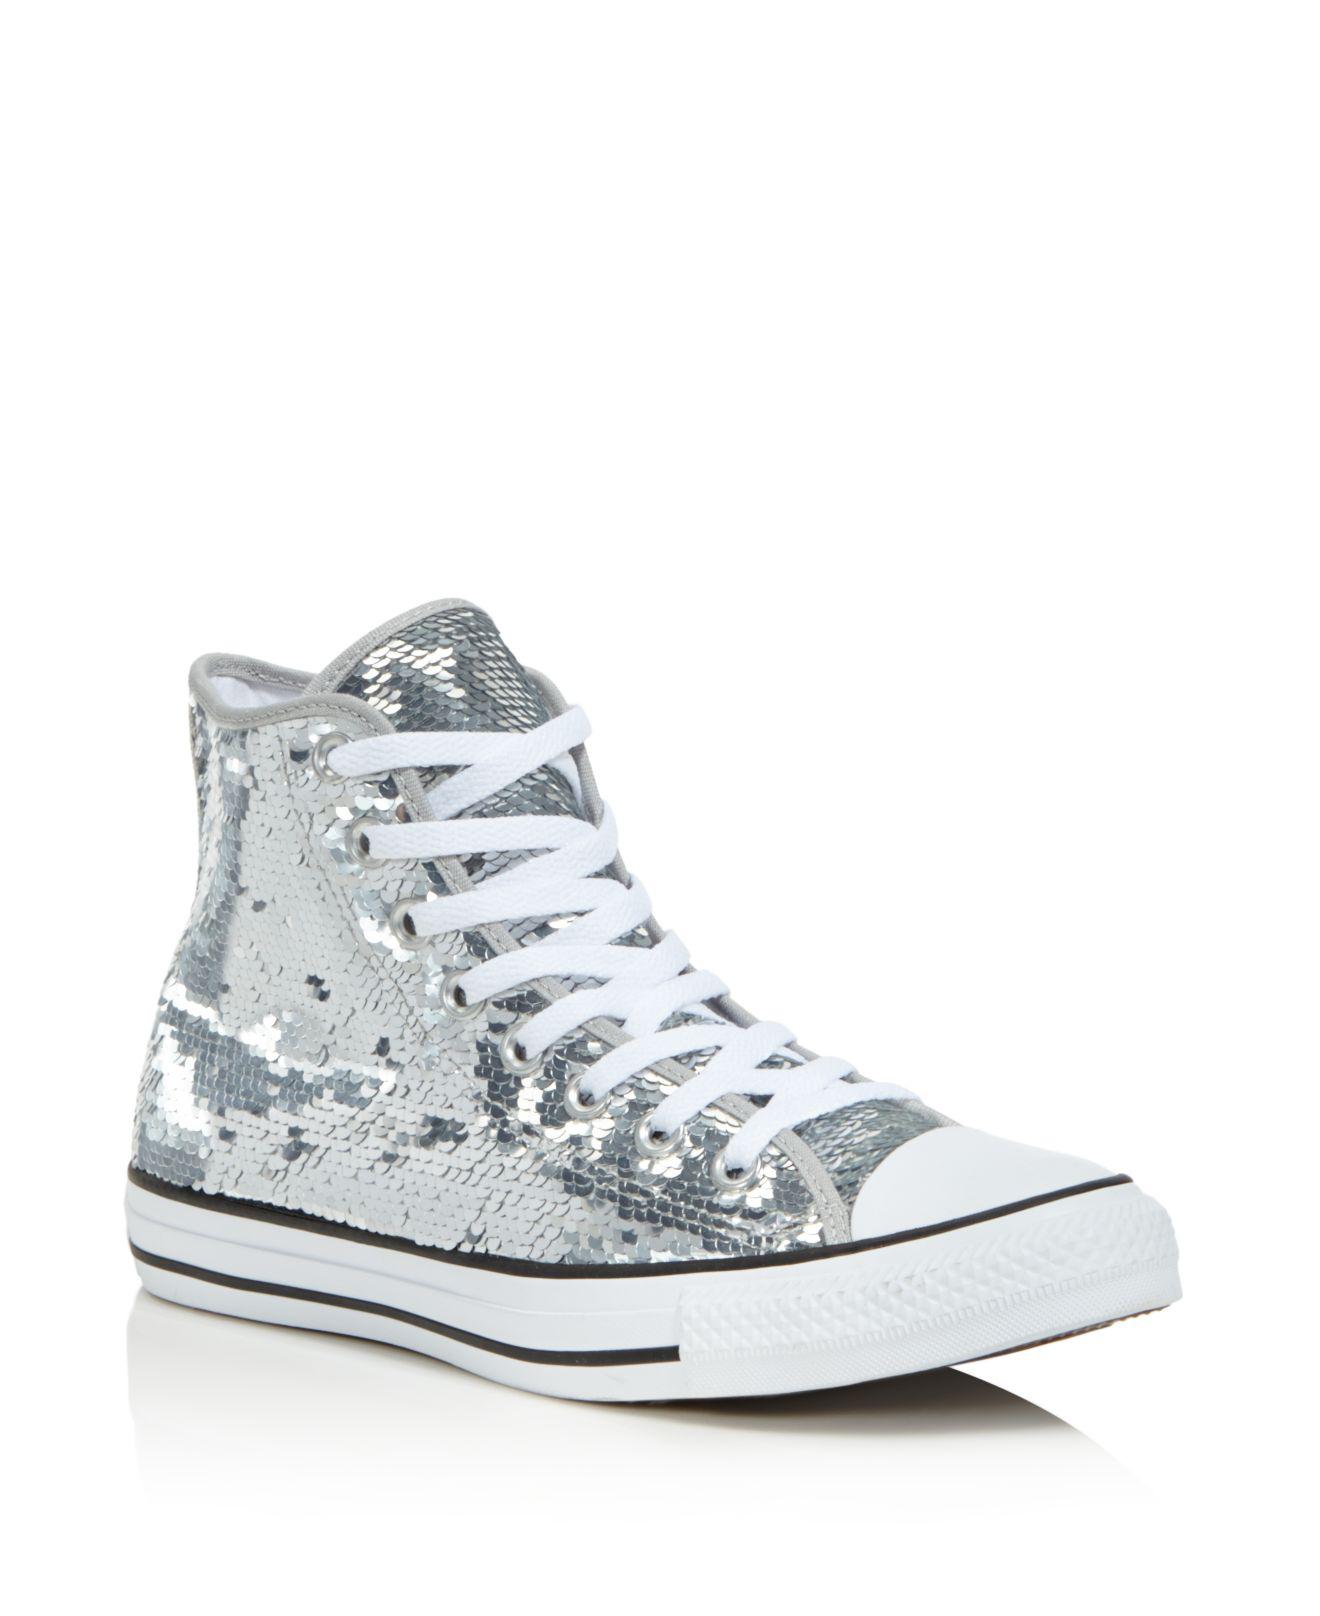 Converse Women's Chuck Taylor All Star Sequin High Top Sneakers - Lyst